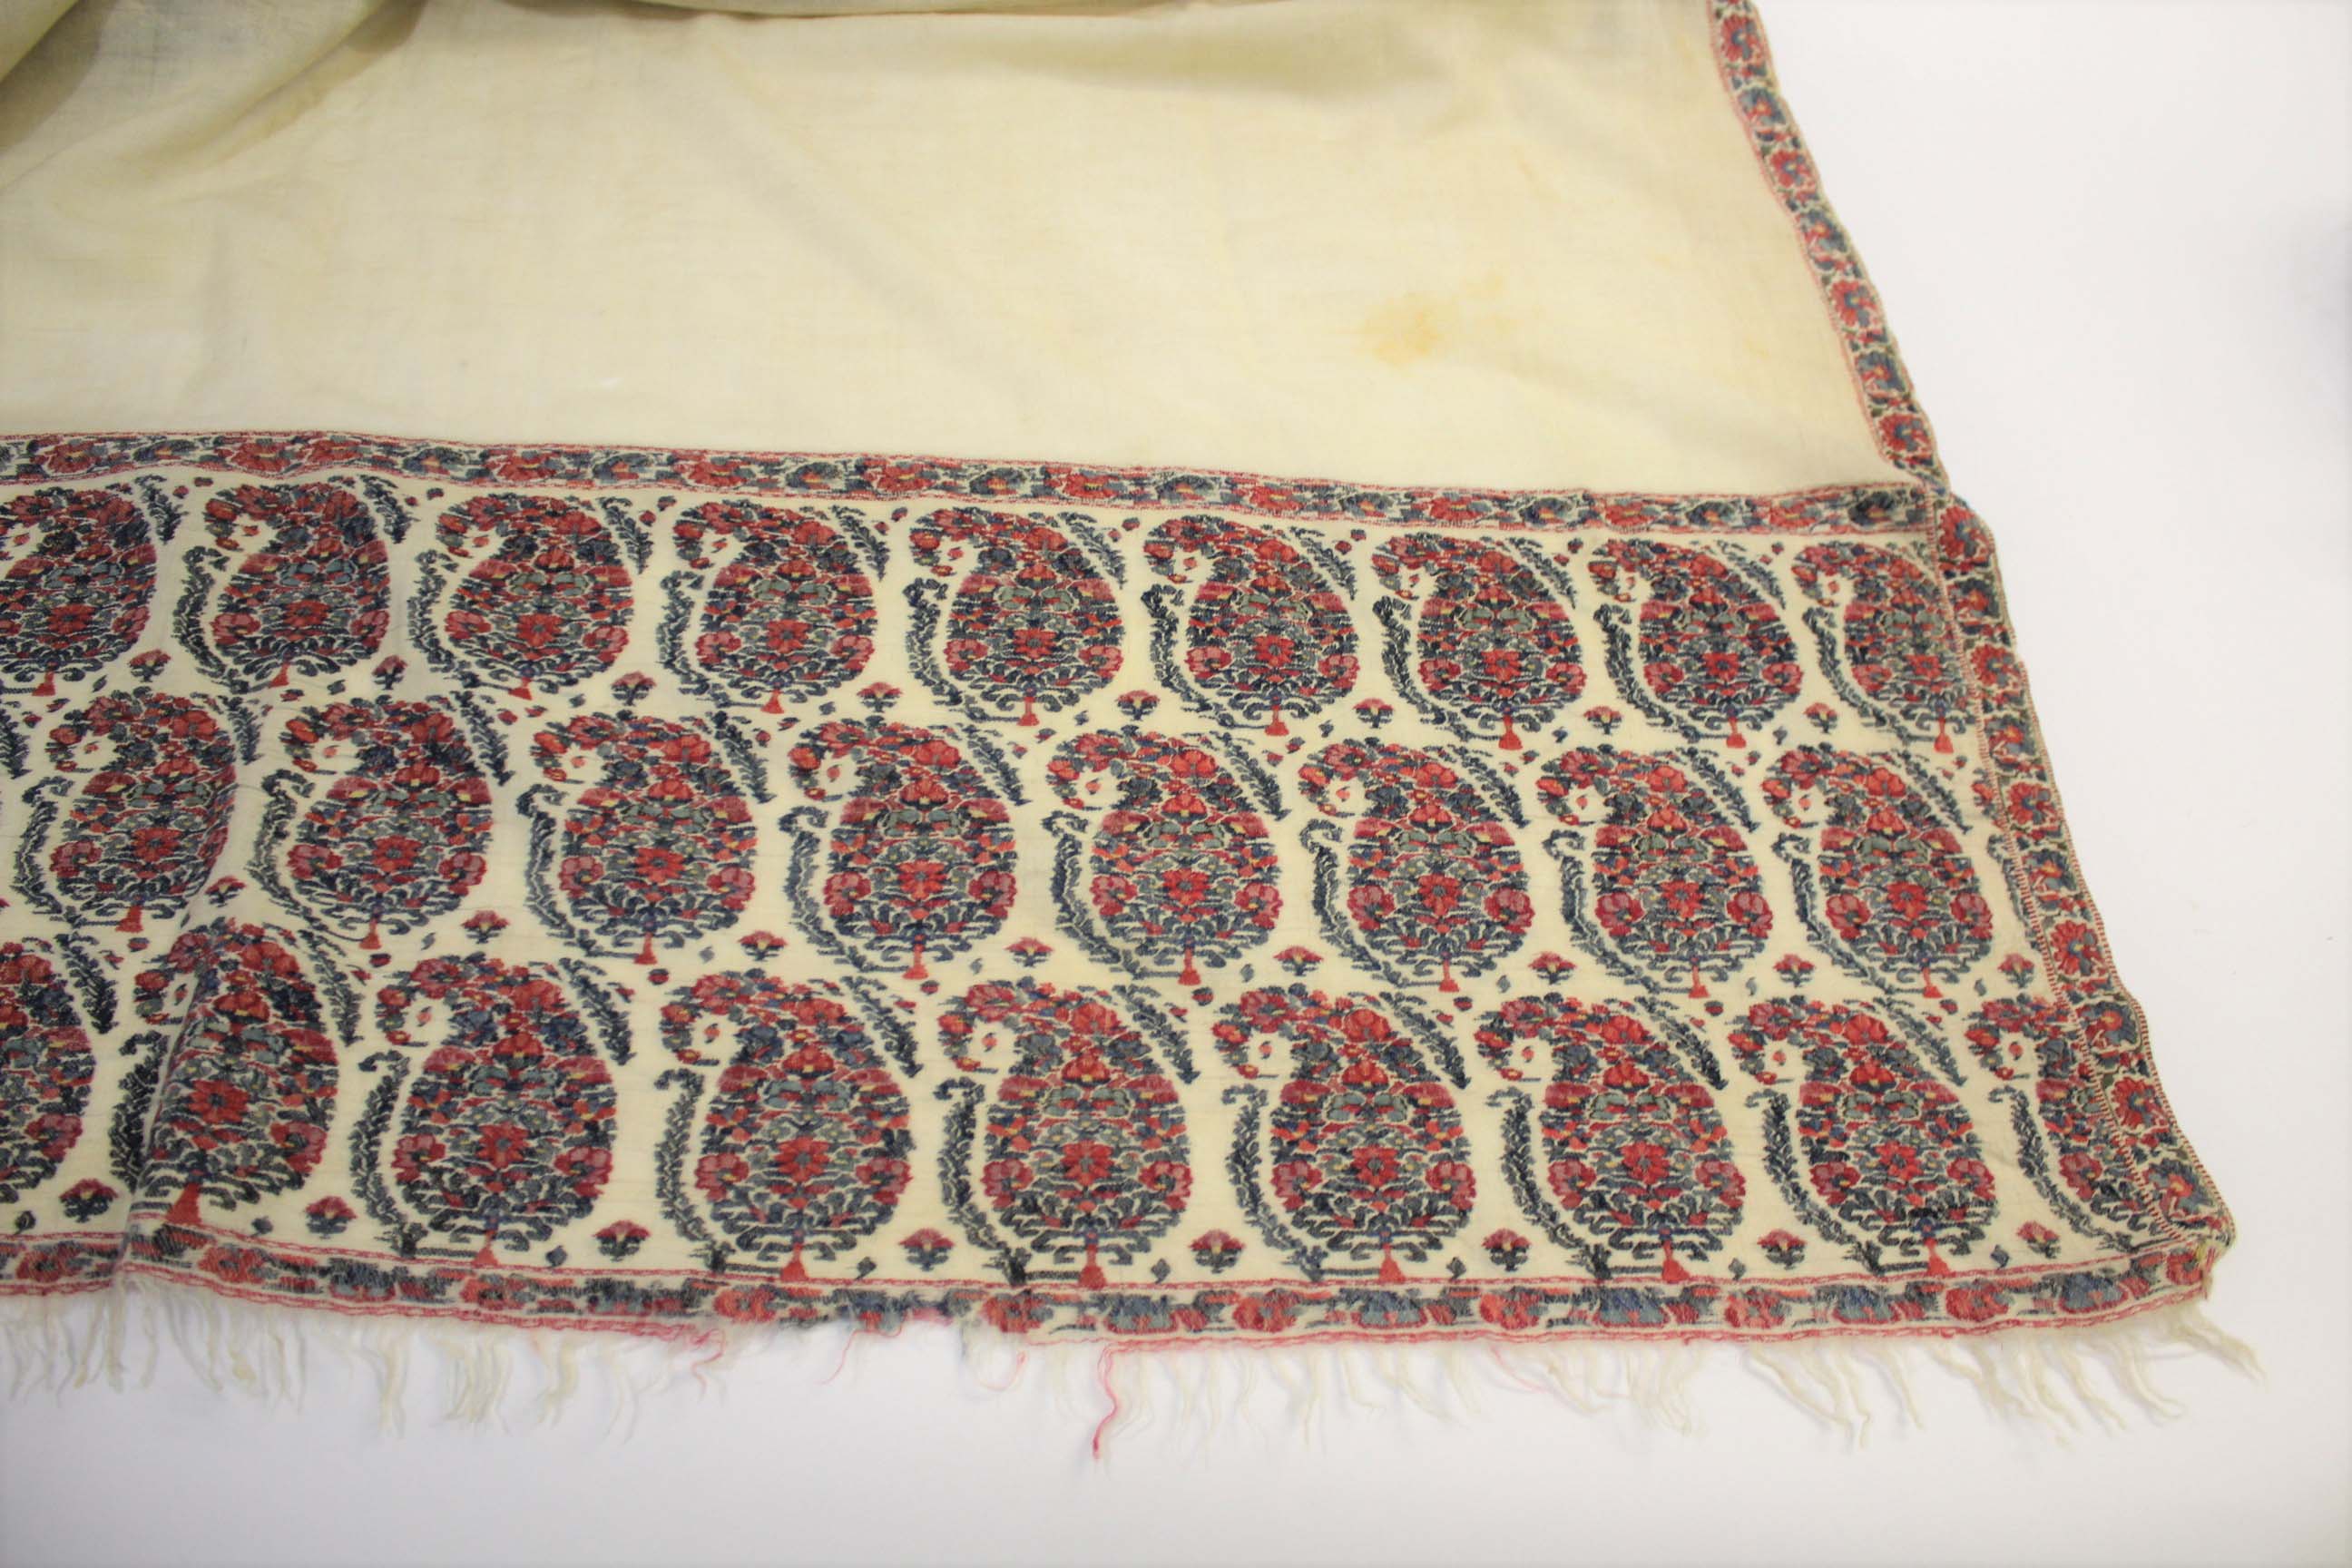 19THC PAISLEY SHAWL a mid 19thc paisley wool cashmere shawl (264cms by 126cms), and also with a fine - Image 2 of 9